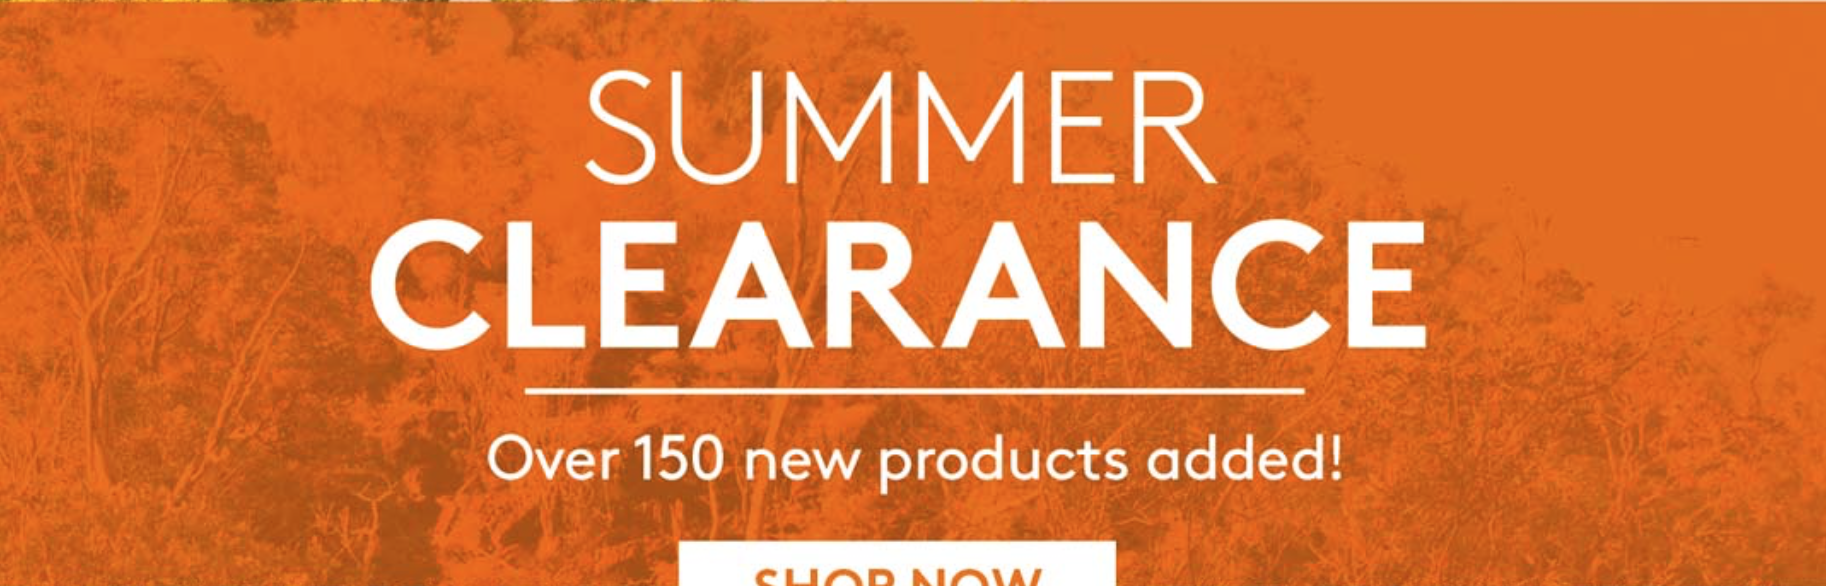 Kathmandu: Summer Clearance up to 50% off range of clothing and much more